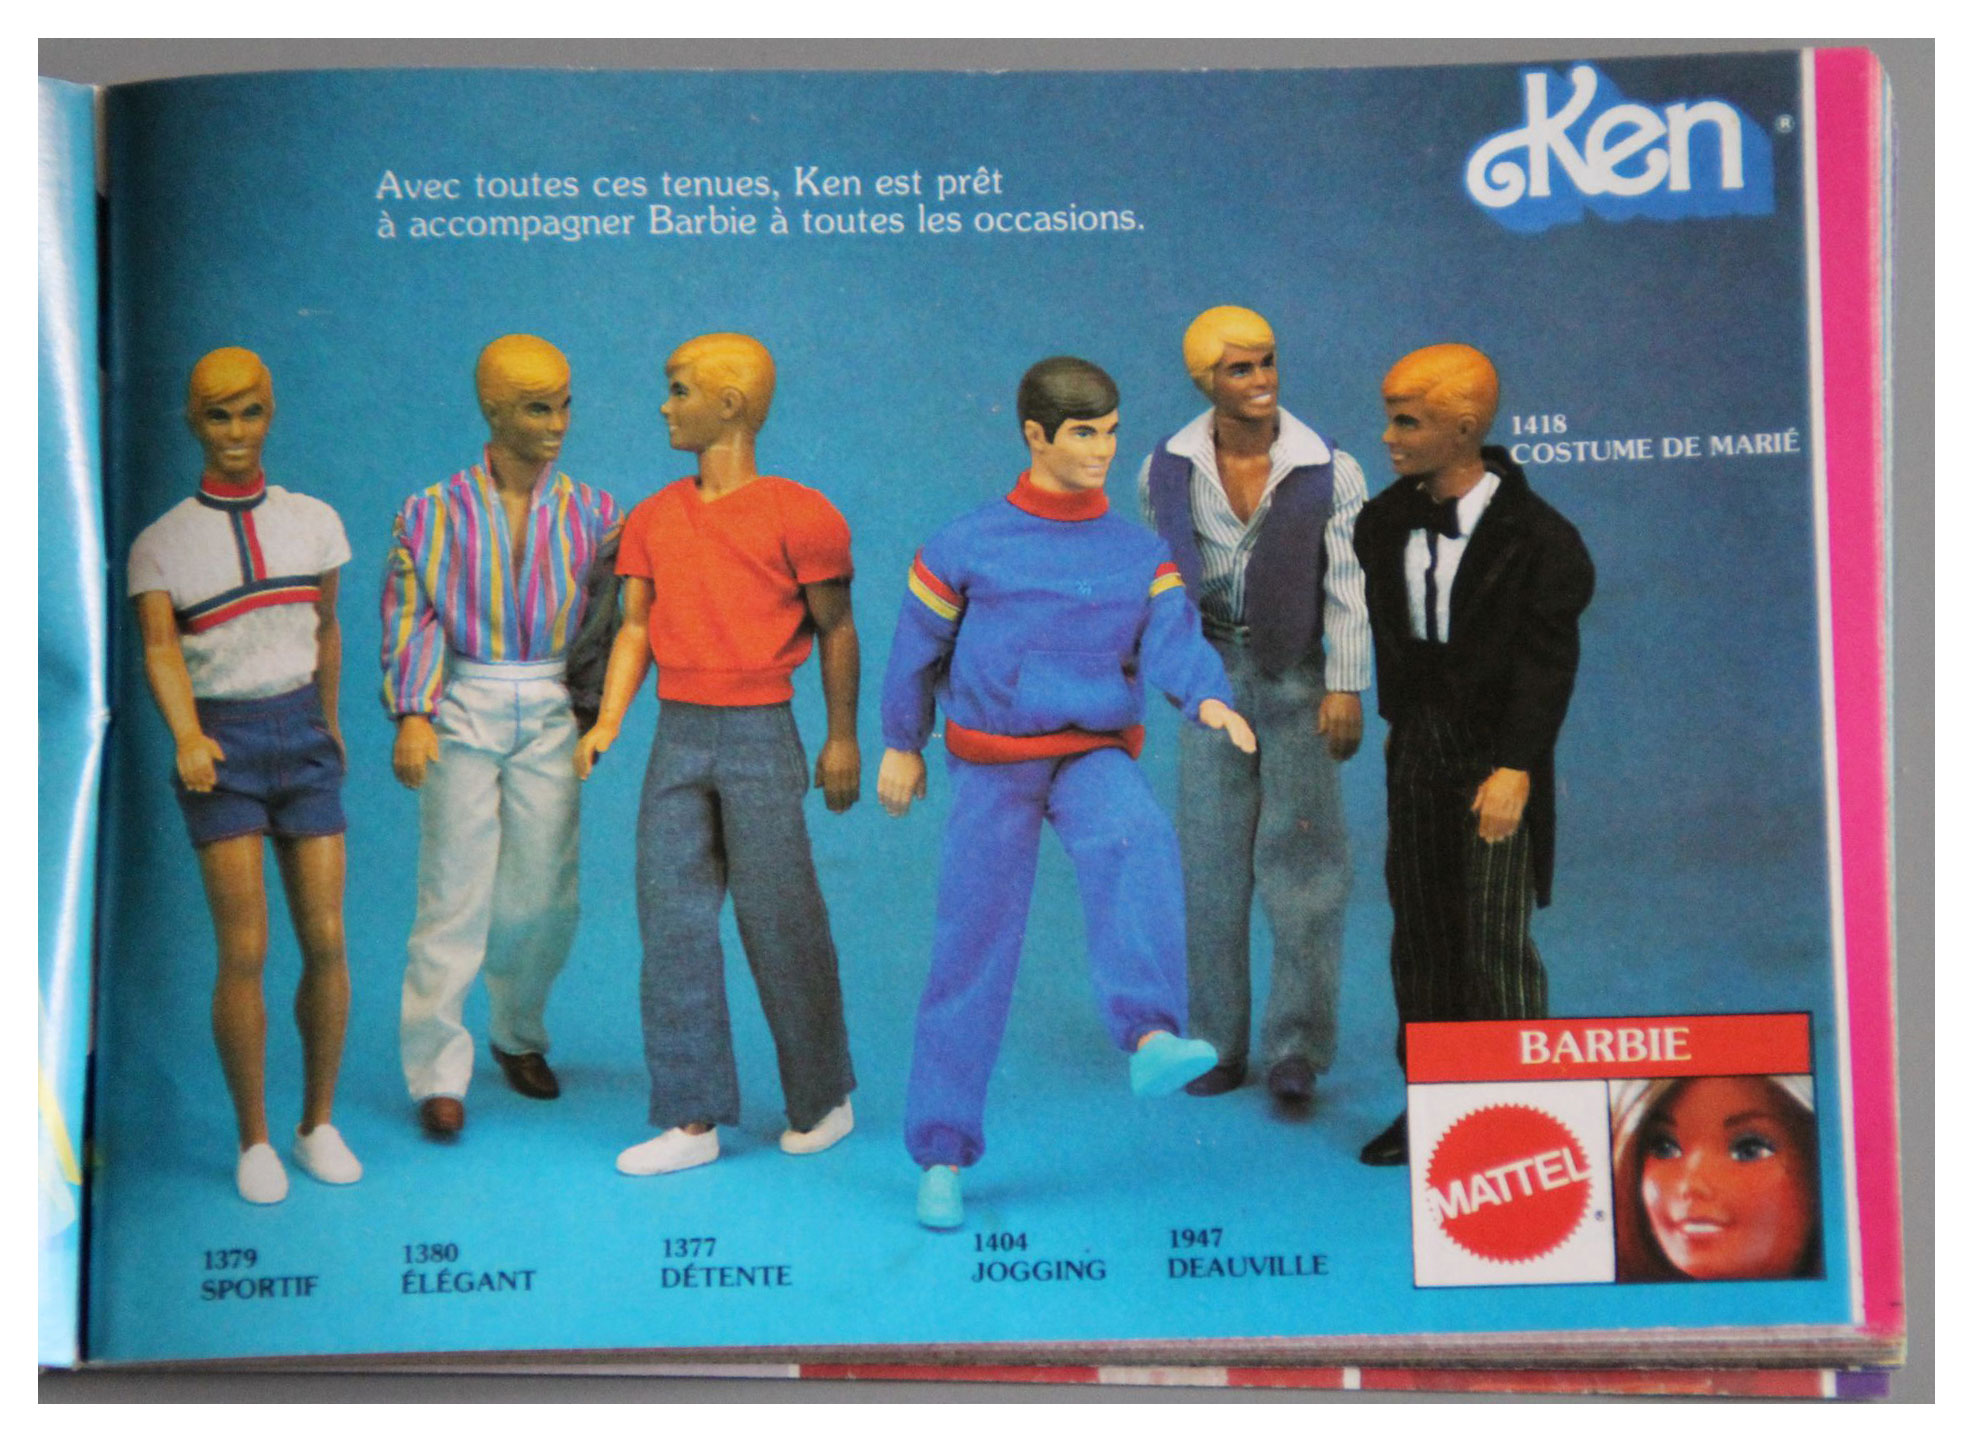 From 1981 French Mattel booklet